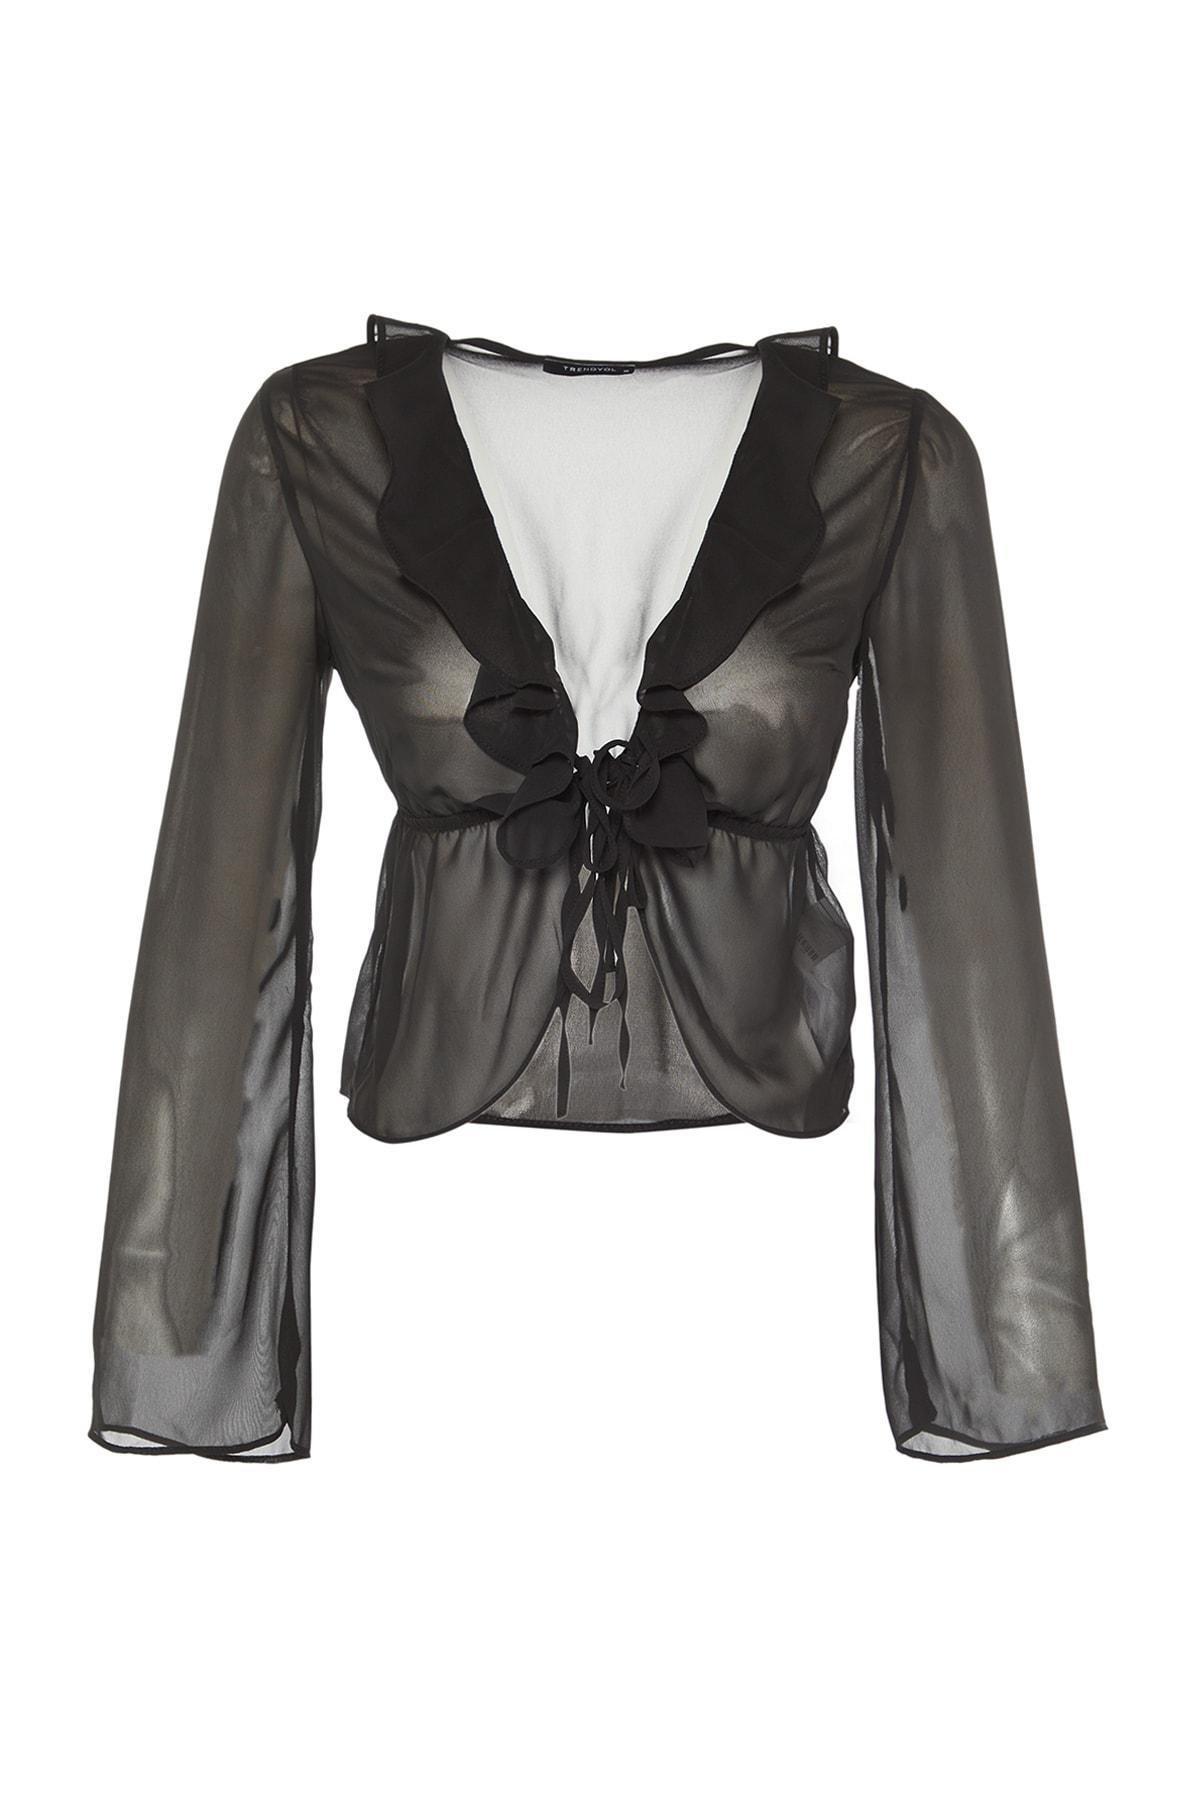 Trendyol - Black Double-Breasted V-Neck Fitted Blouse